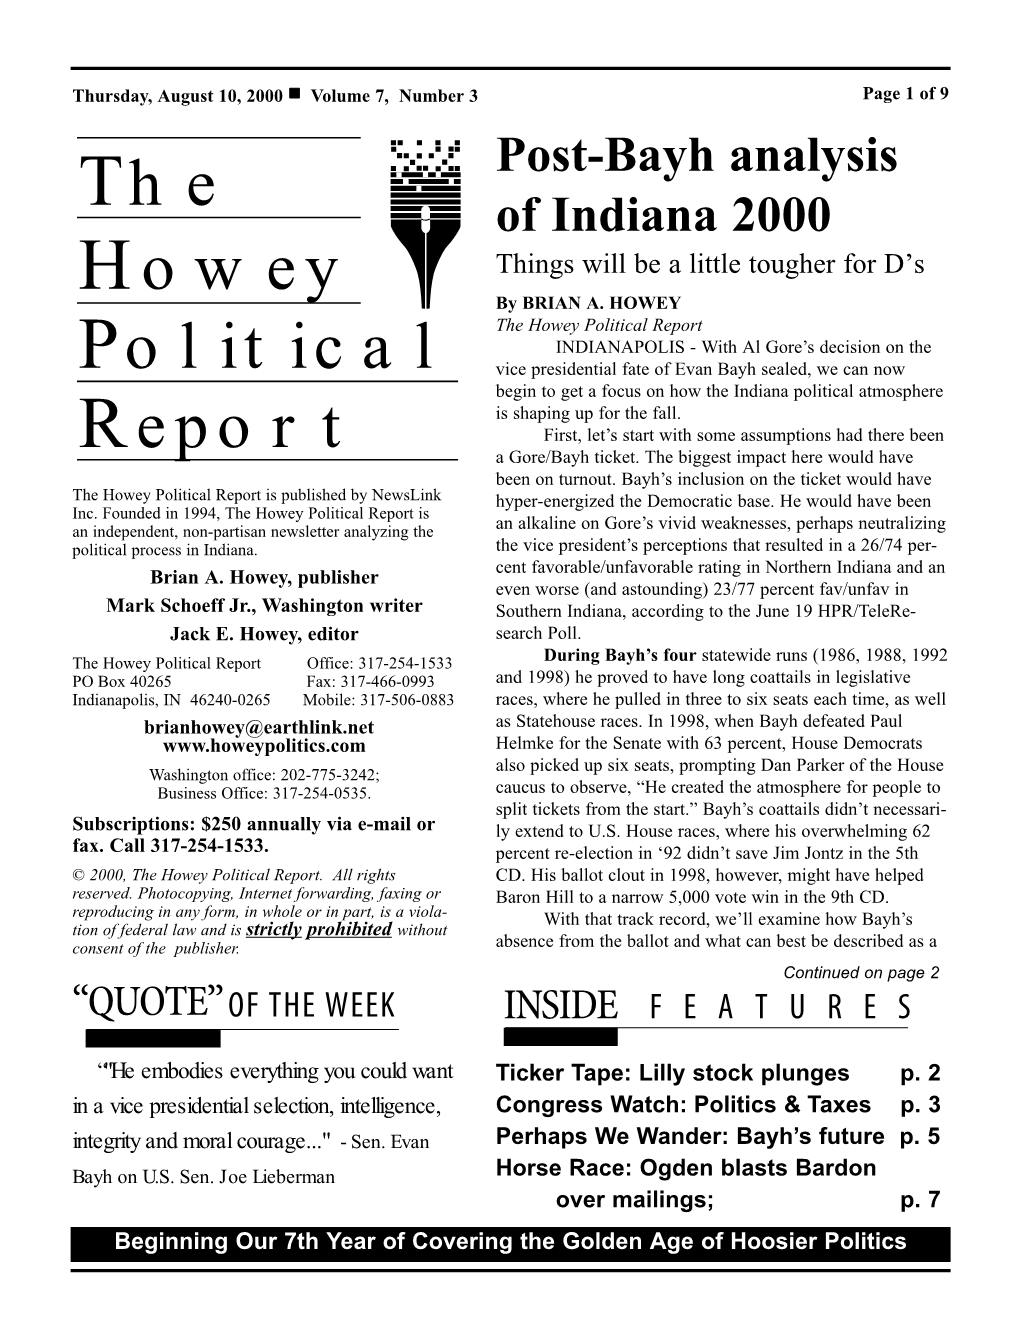 The Howey Political Report